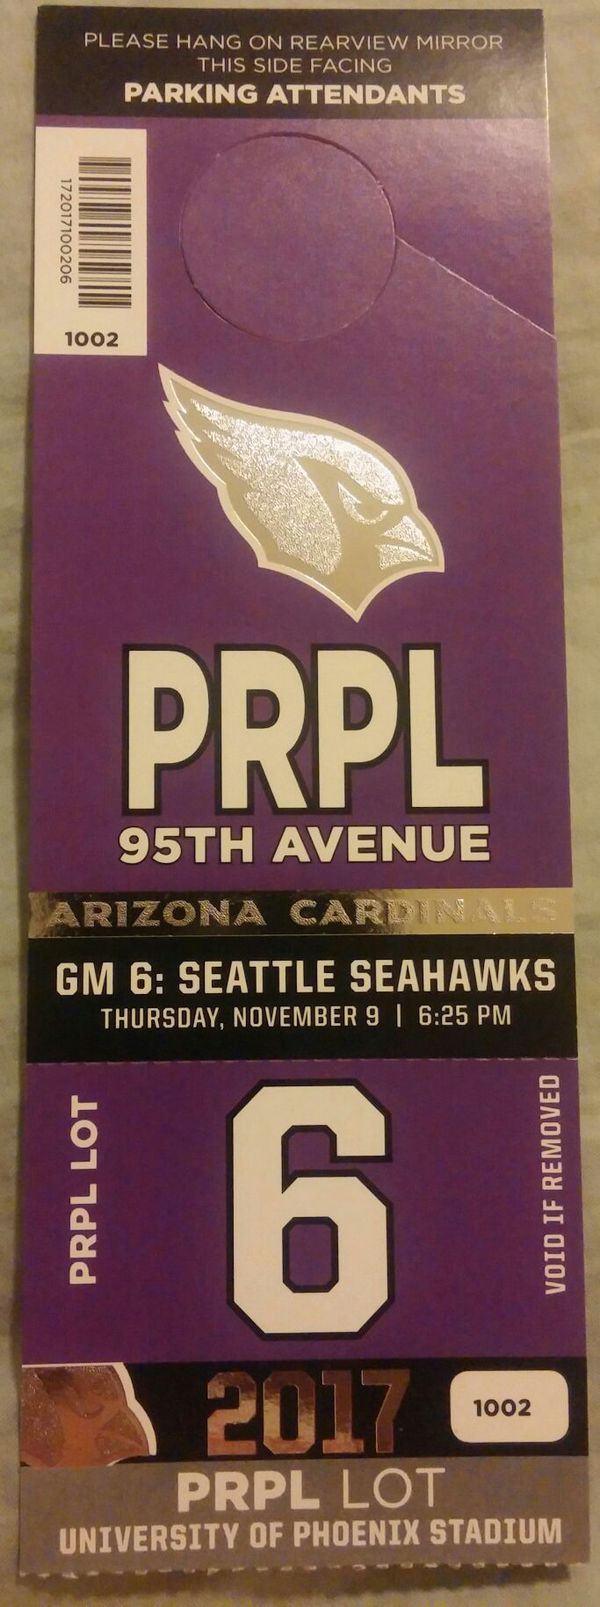 Seattle Seahawks vs Arizona Cardinals (2) Purple lot Parking Passes - (games 6-10 available) for ...